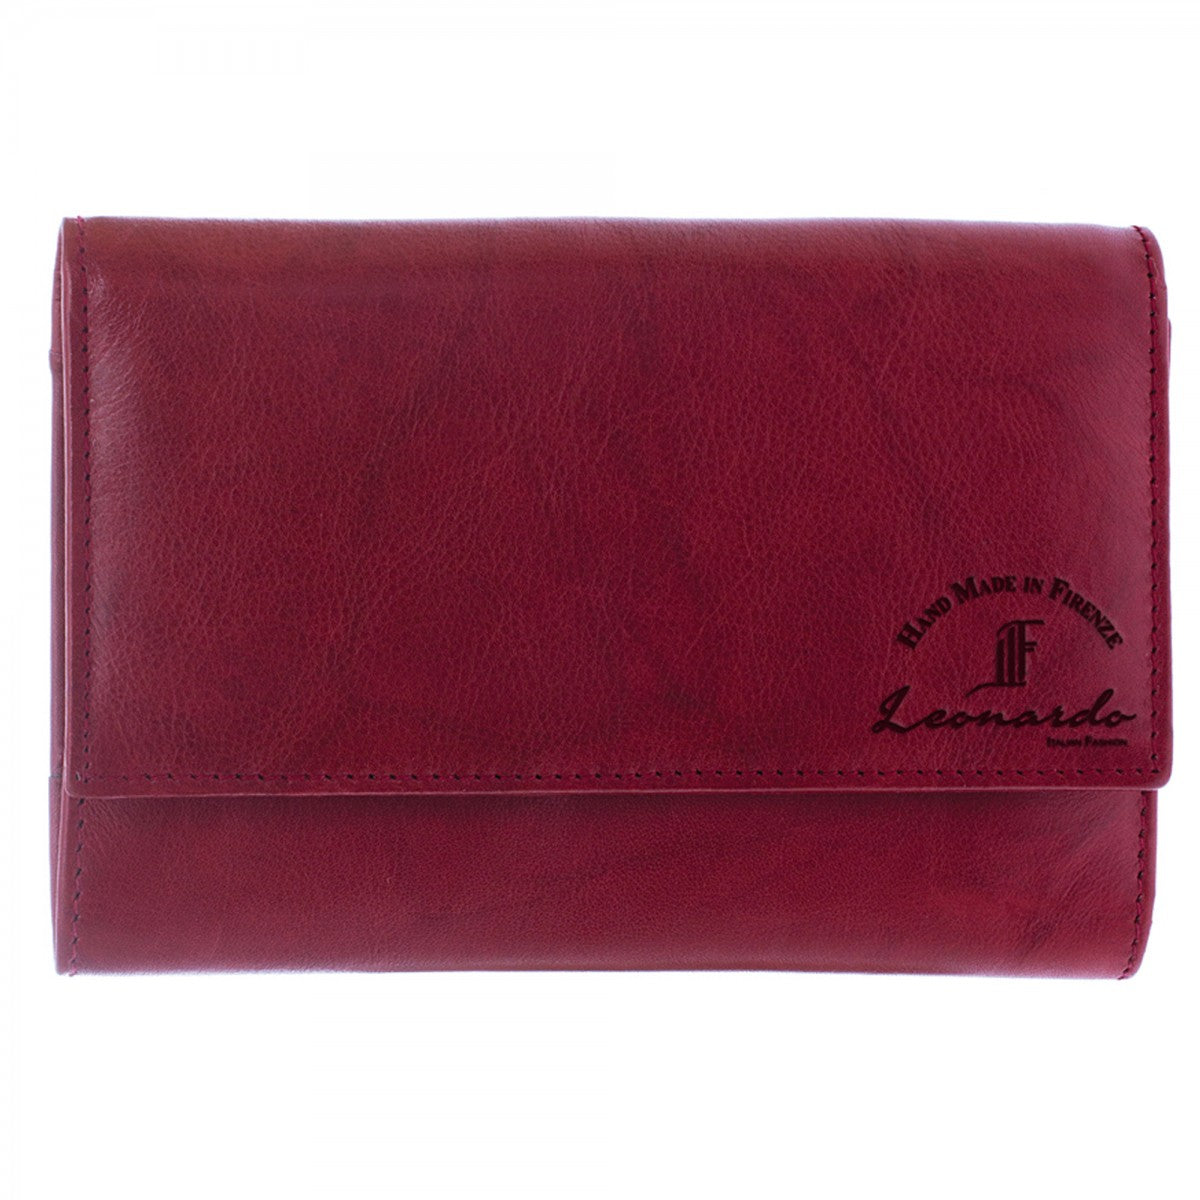 Buy Genuine Ostrich Business Card Holder-red Online in India 